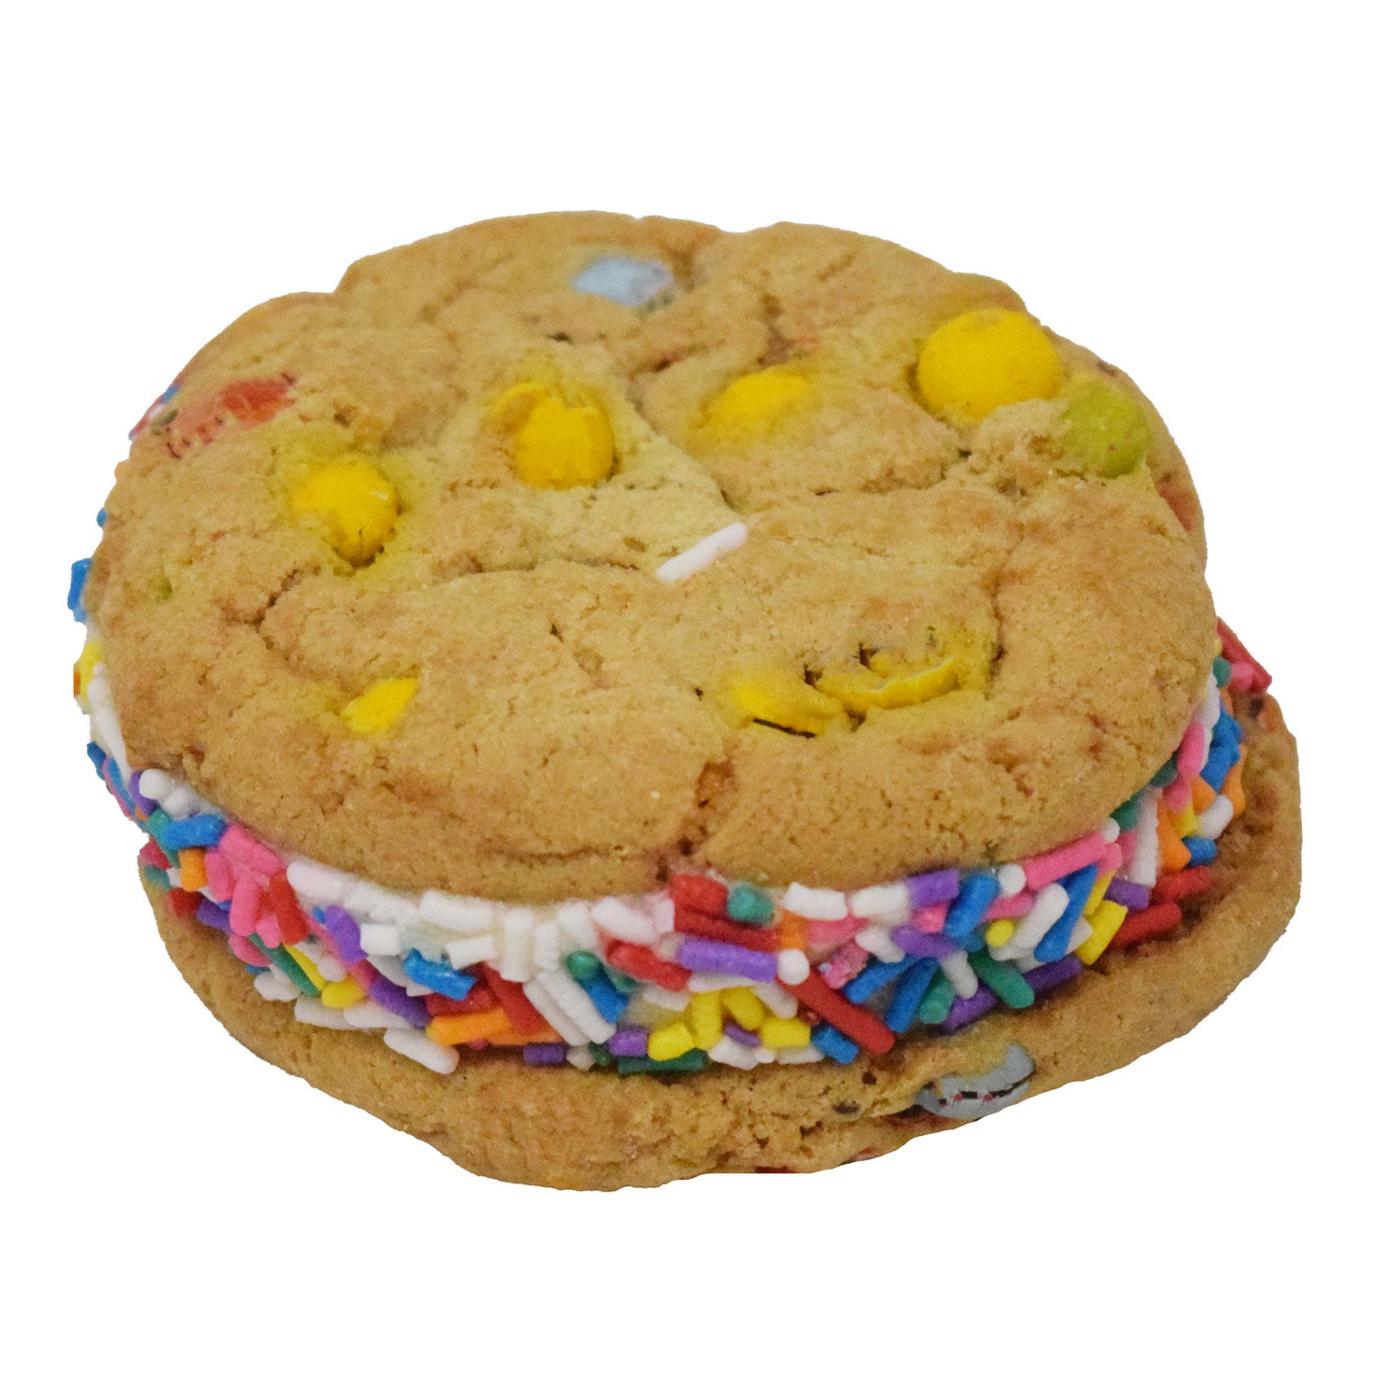 H-E-B Candy Cookie with Vanilla Ice Cream and Sprinkles Sandwich; image 2 of 2